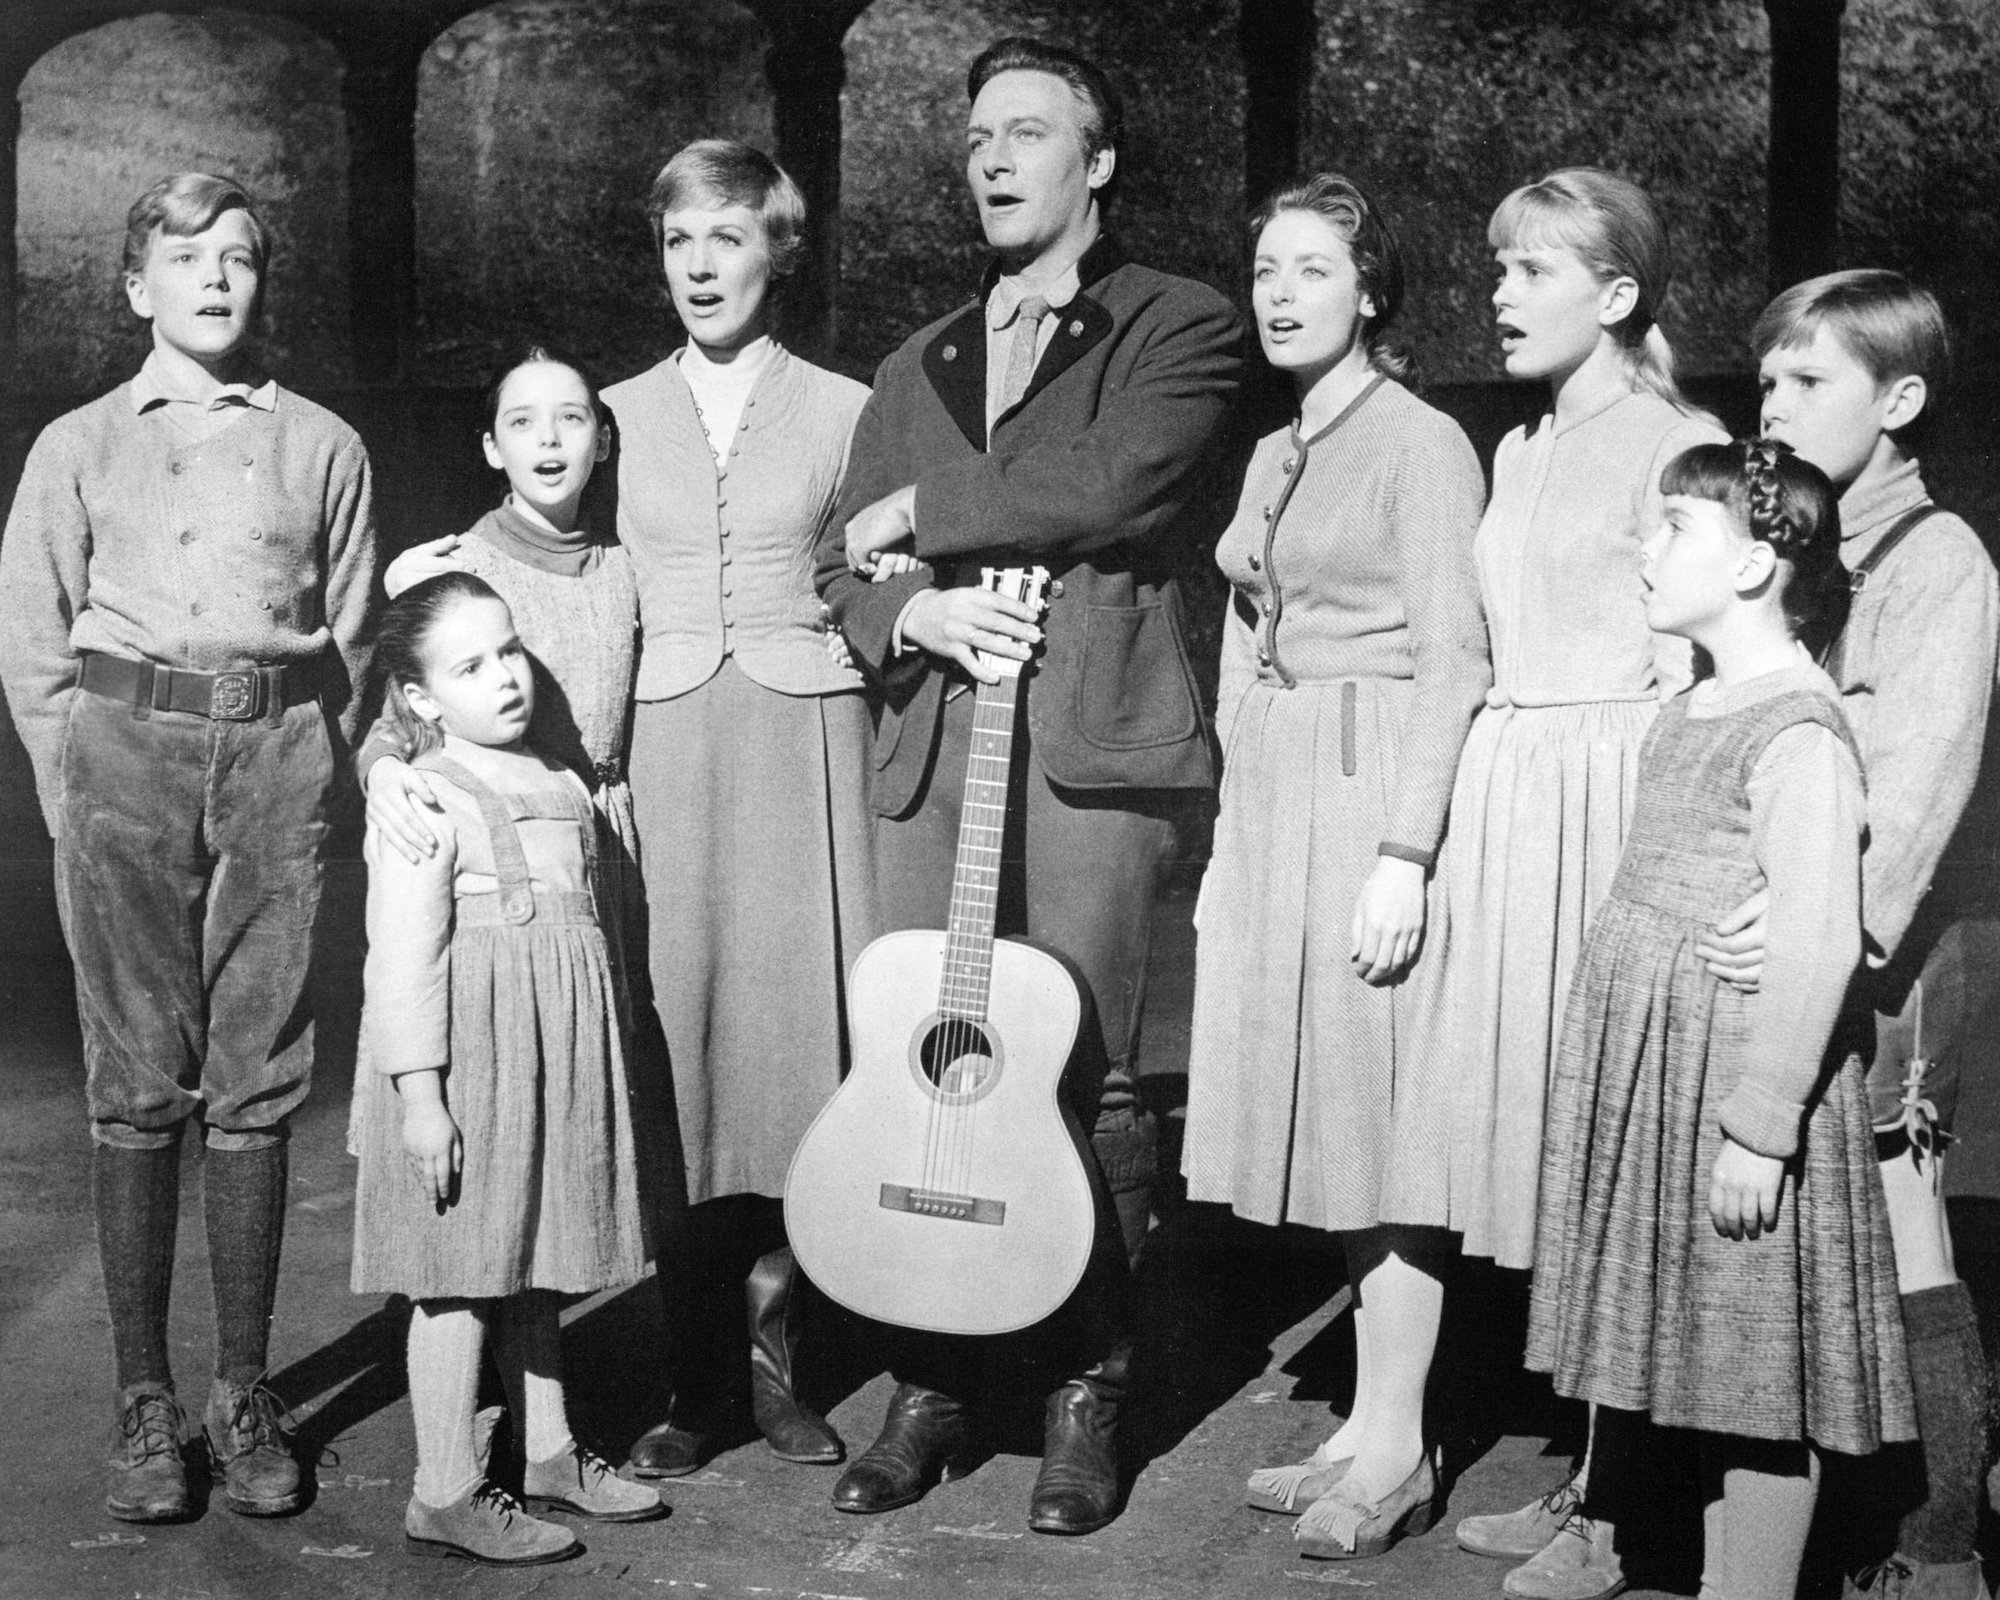 The Von Trapp family from the movie 'The Sound of Music' in a promotional portrait for the film